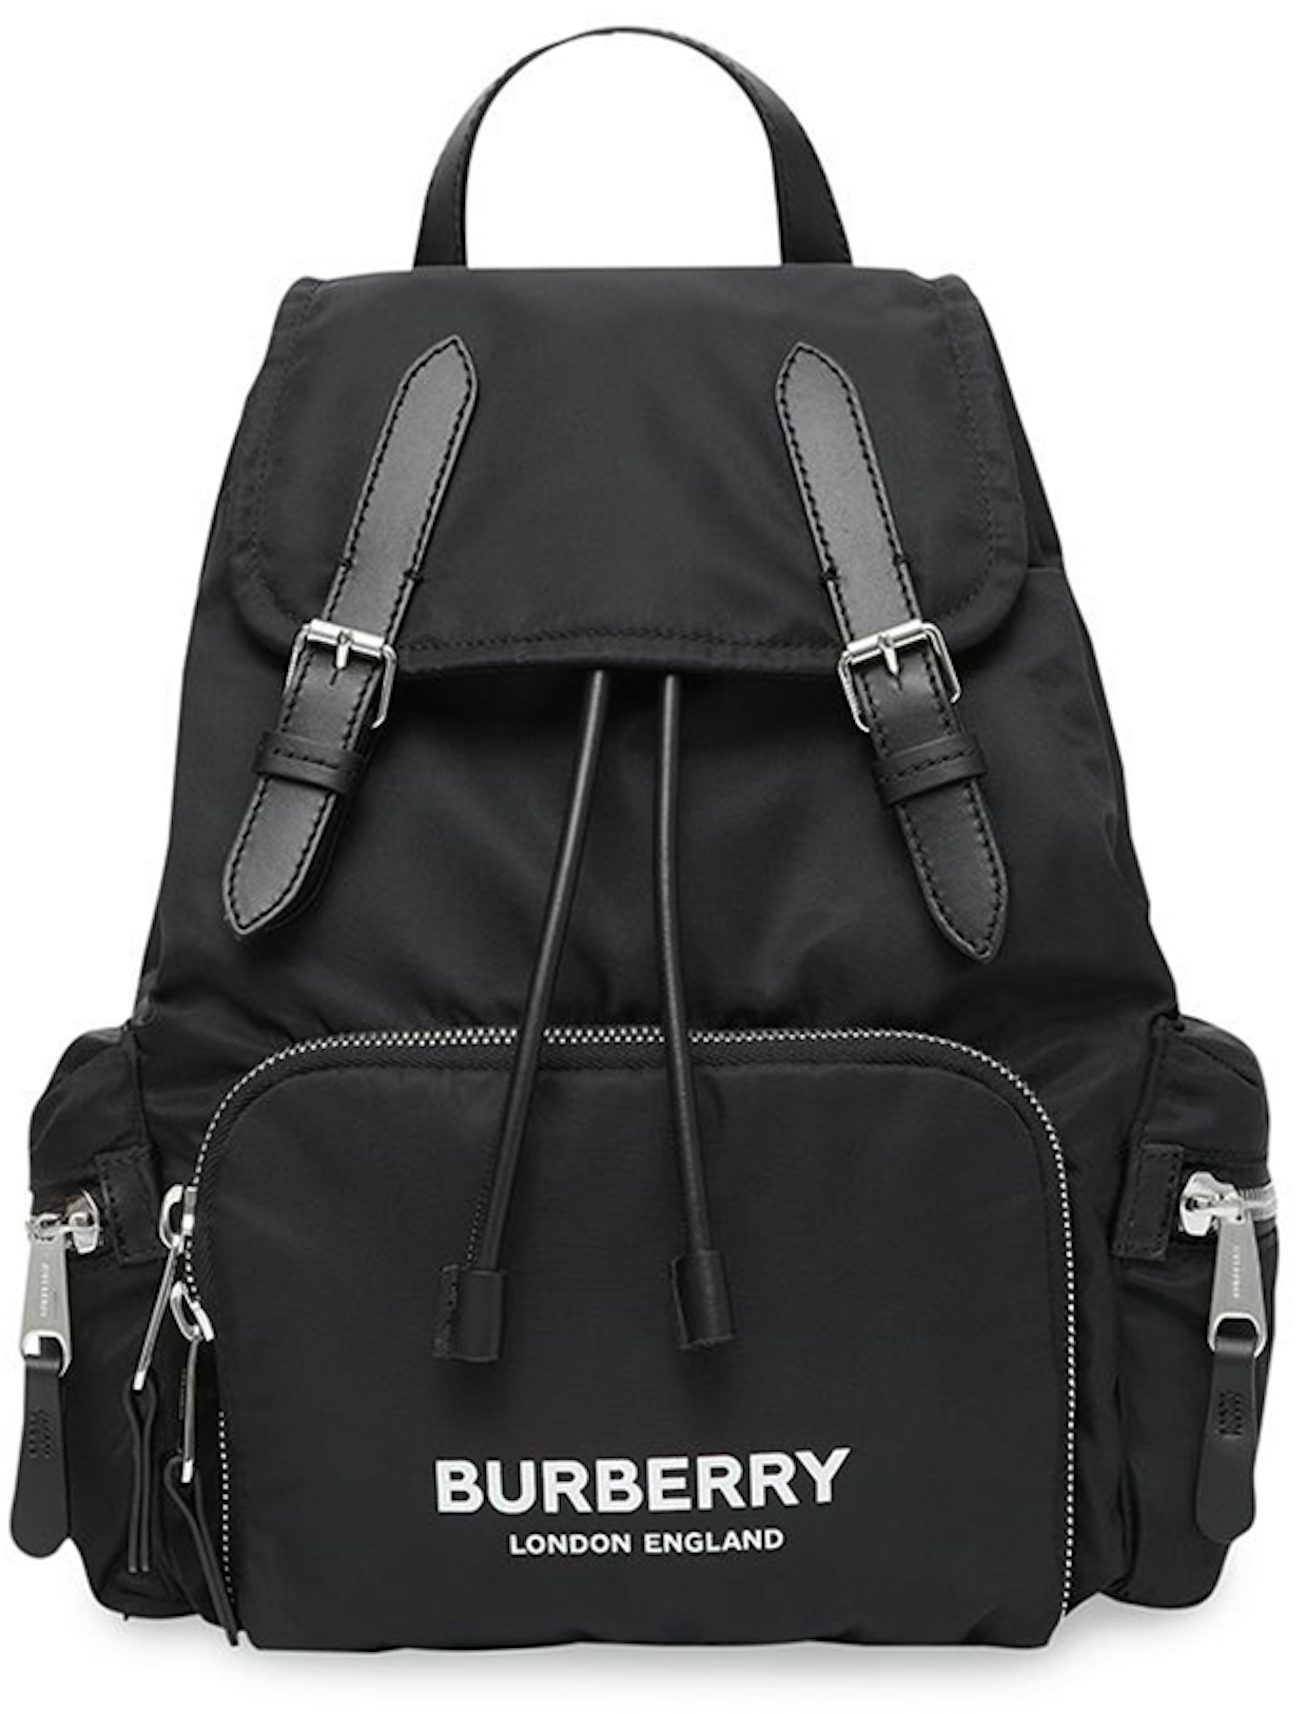 Taylor Swift's Burberry Backpack Is the Easiest Way to Win at Campus Style